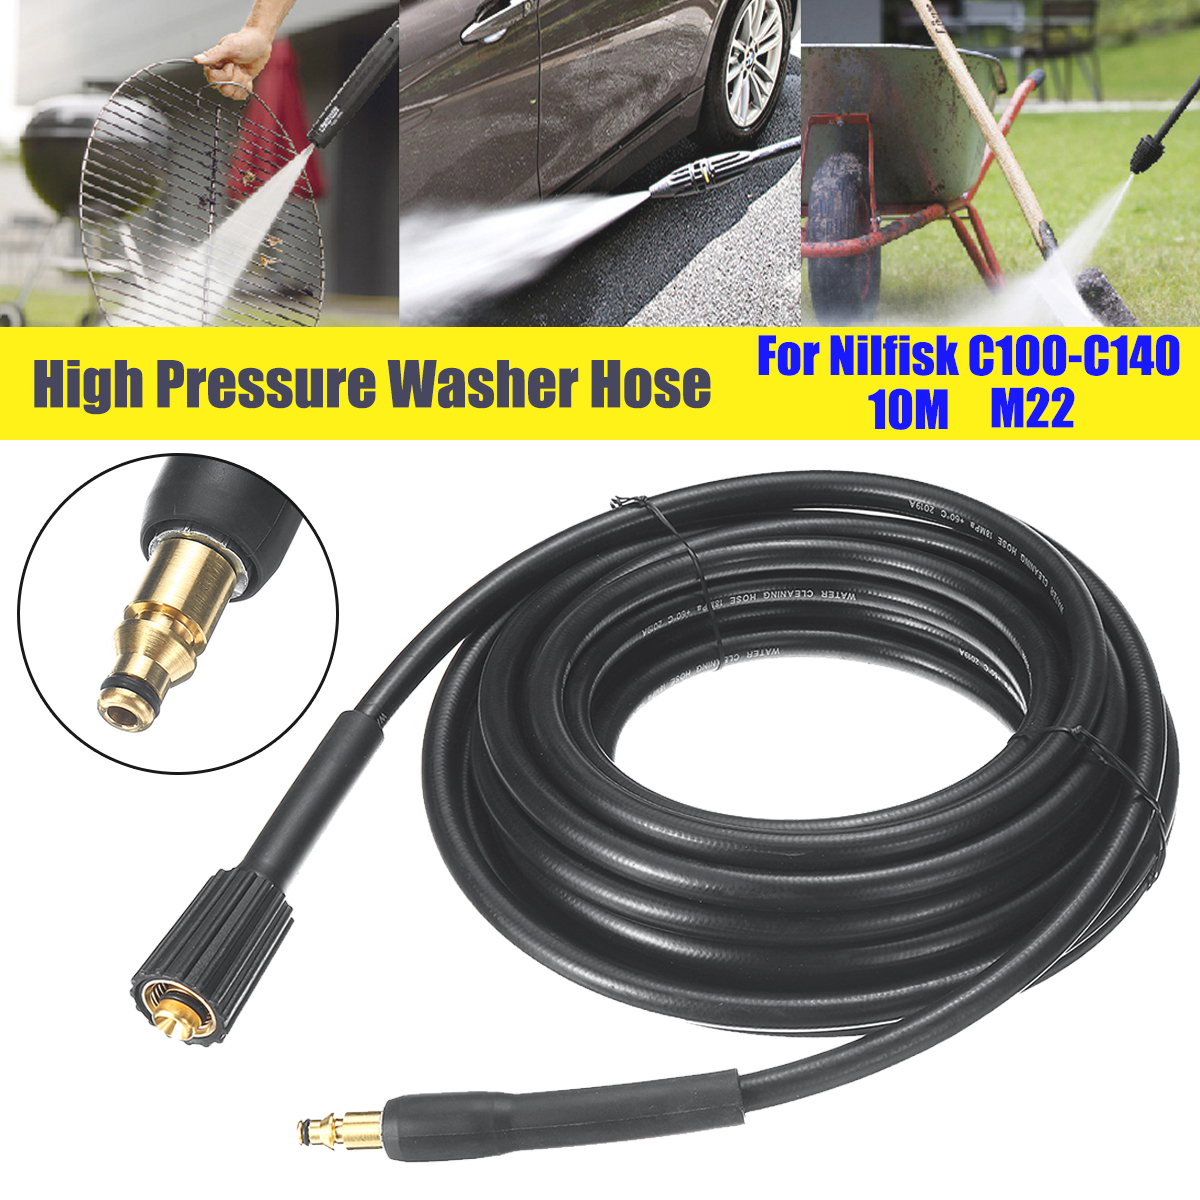 10-Meters-High-Pressure-Washer-Hose-Car-Washer-Water-Cleaning-Extension-Hose-For-Nilfisk-C100-C110-C-1563247-1